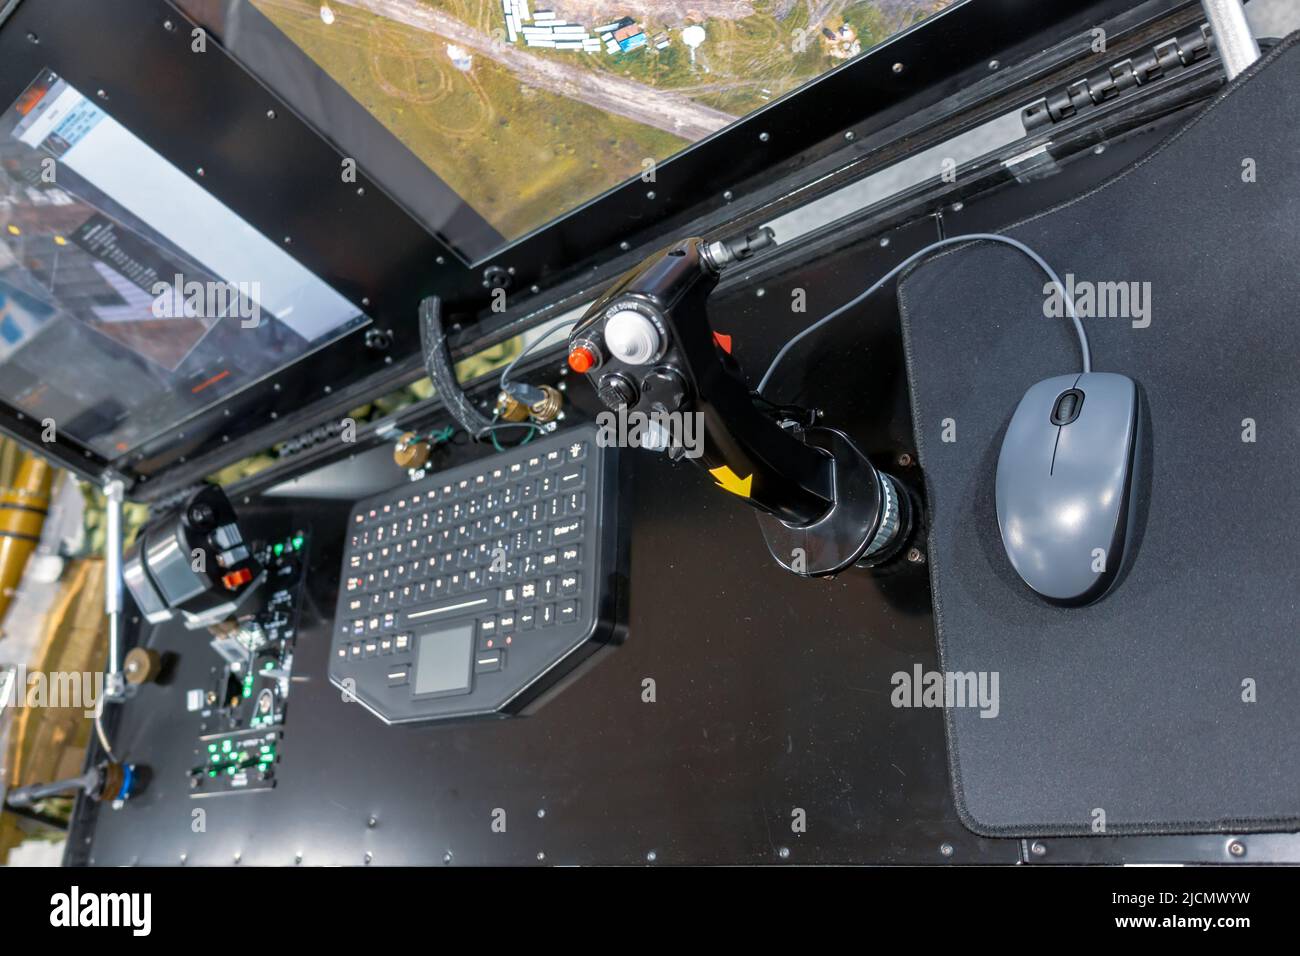 Control panel with joystick for unmanned aerial vehicle. Stock Photo